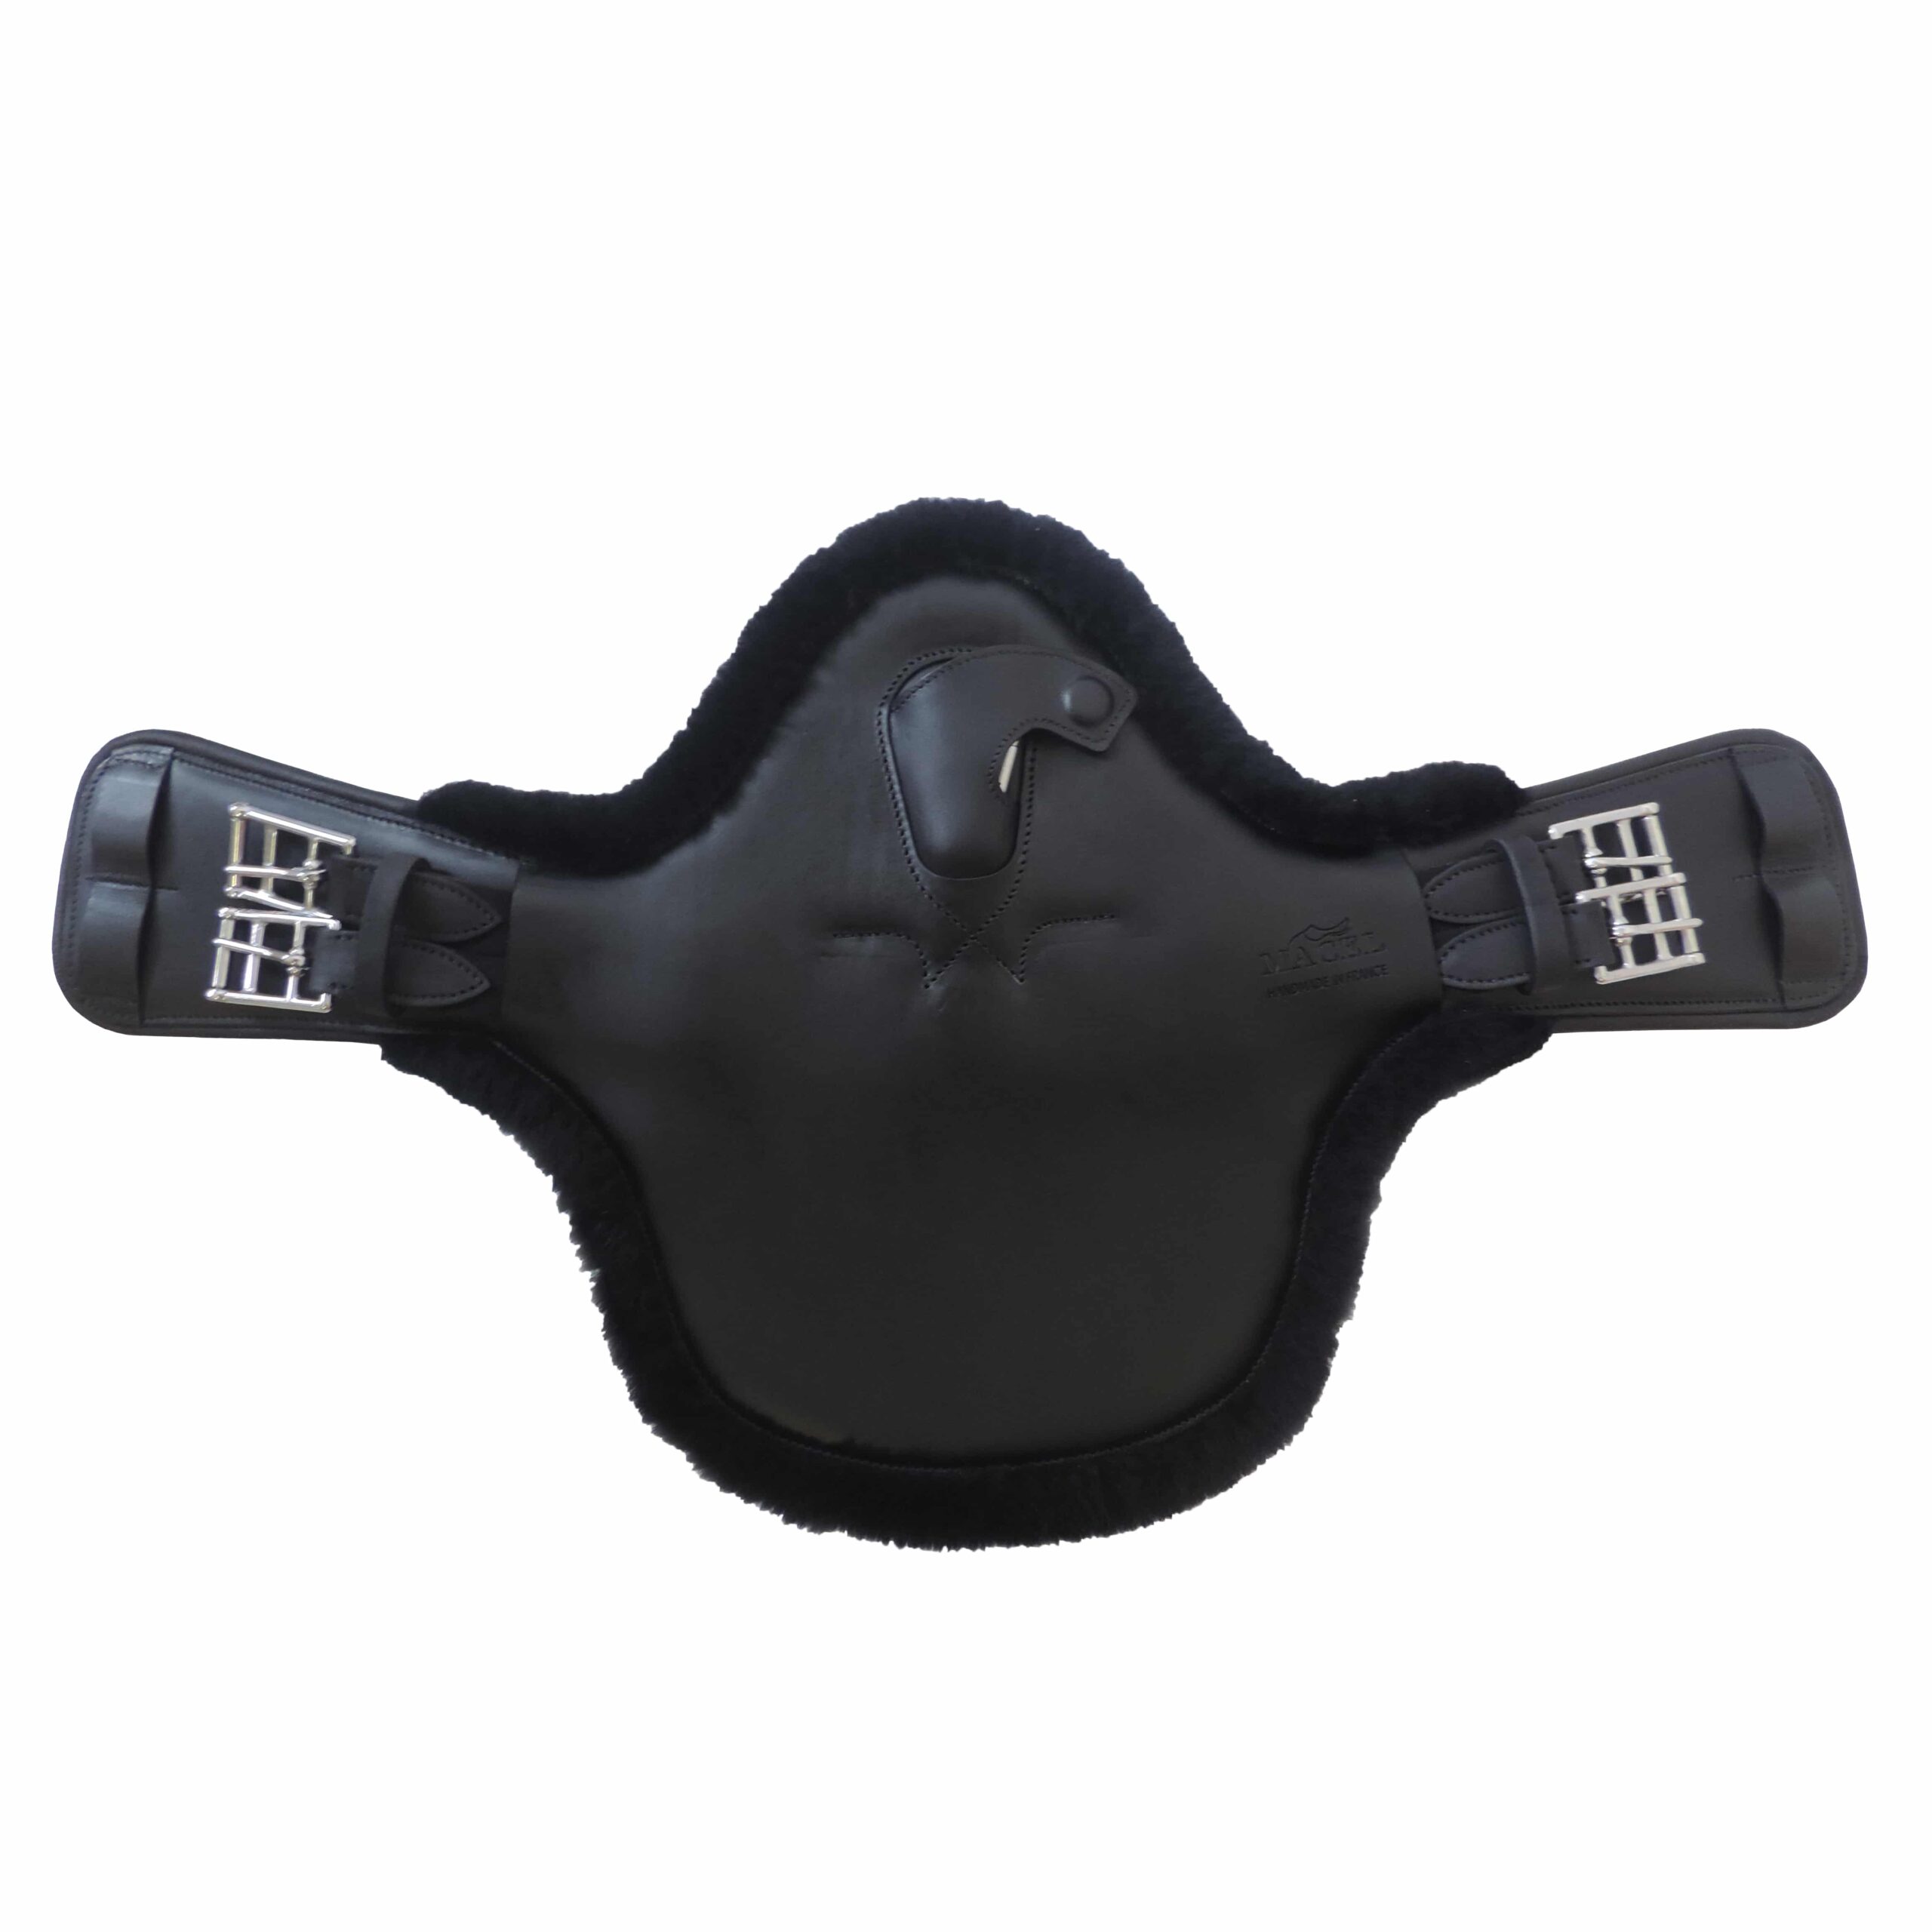 Short belly guard leather girth with sheepskin lining